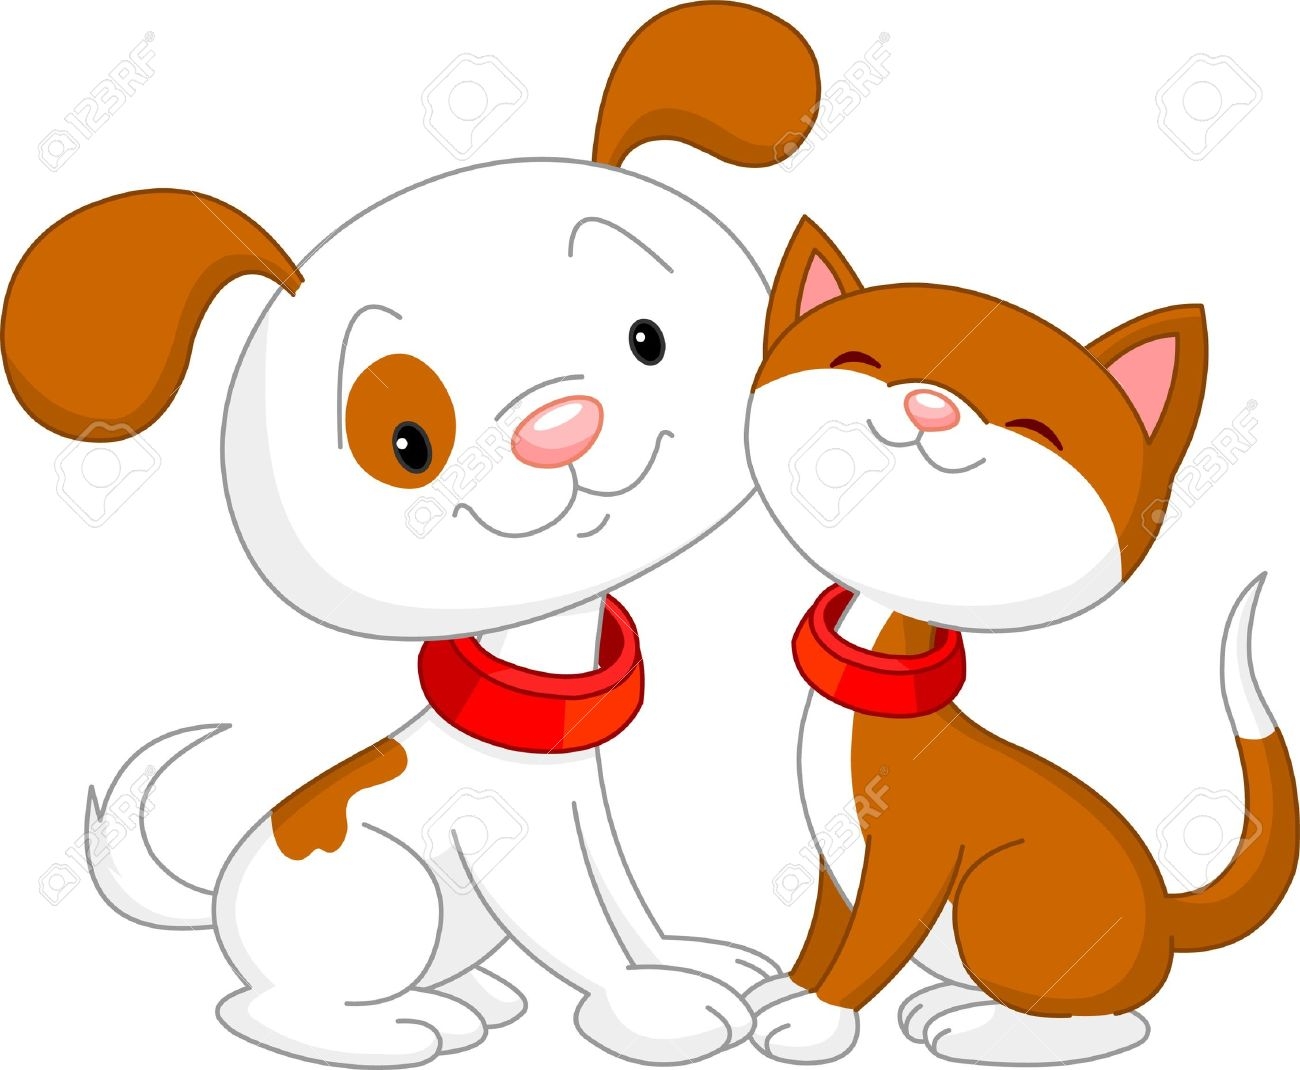 Dog and cat together clipart - Dog And Cat Clipart